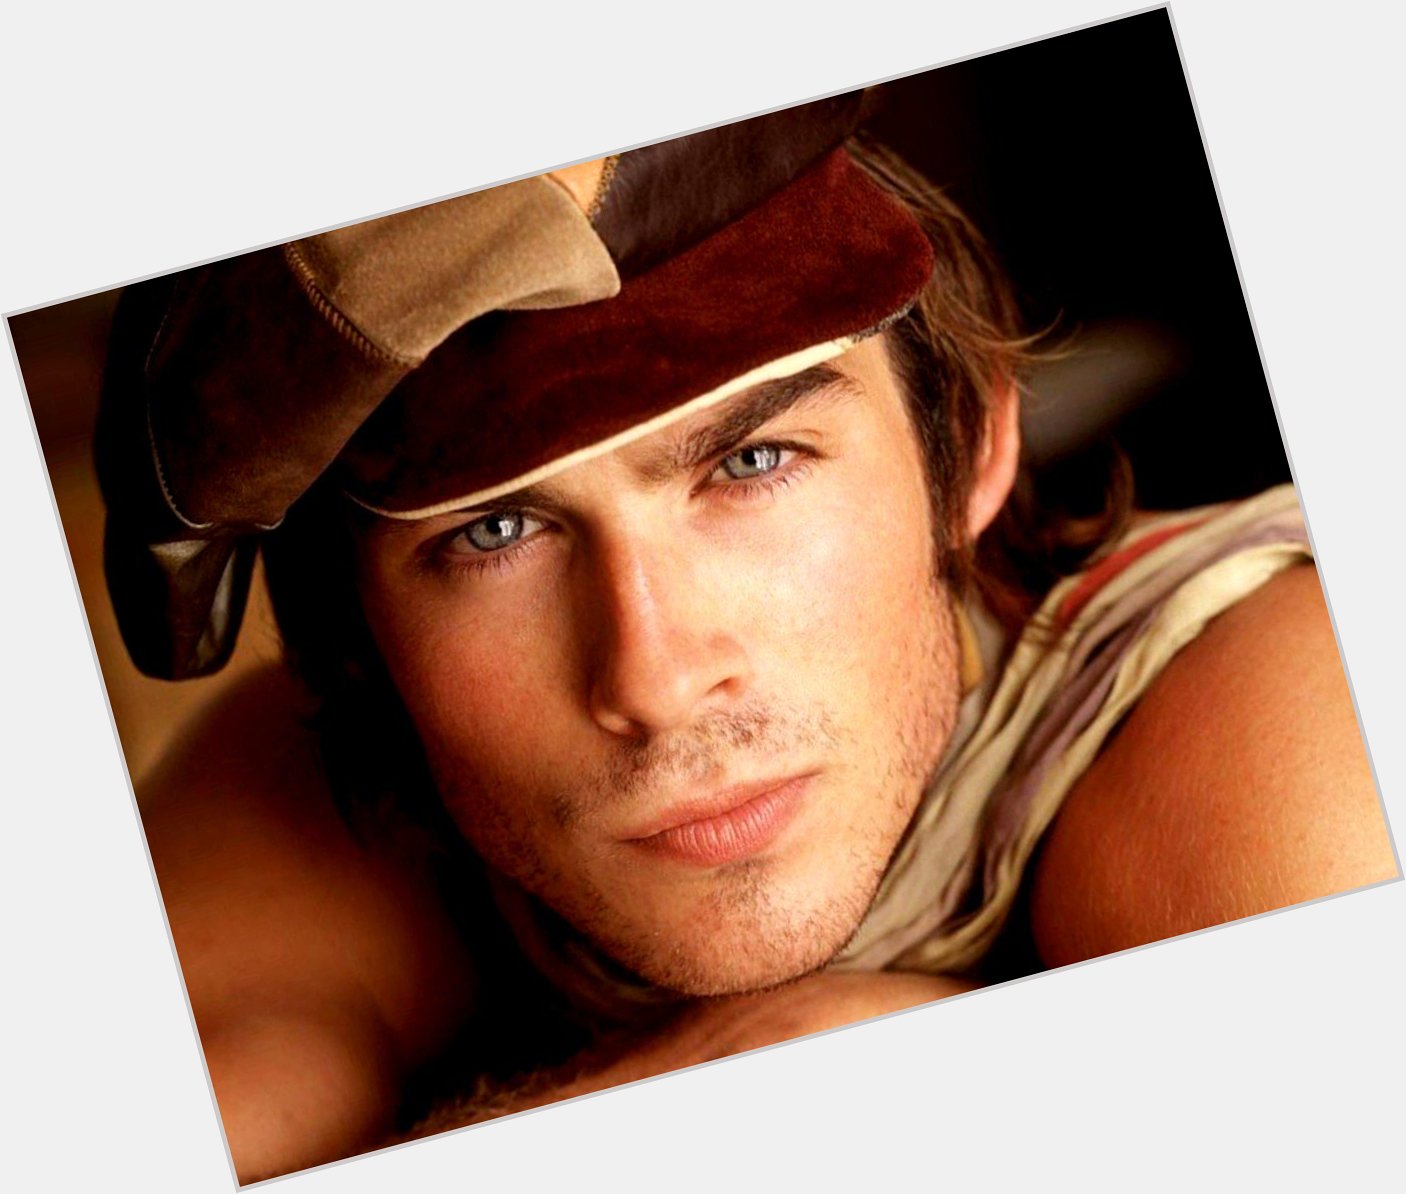 YAY... Wishing all blessings of God to you Ian!!! ; ) Happy Birthday Ian Somerhalder From Brazil 